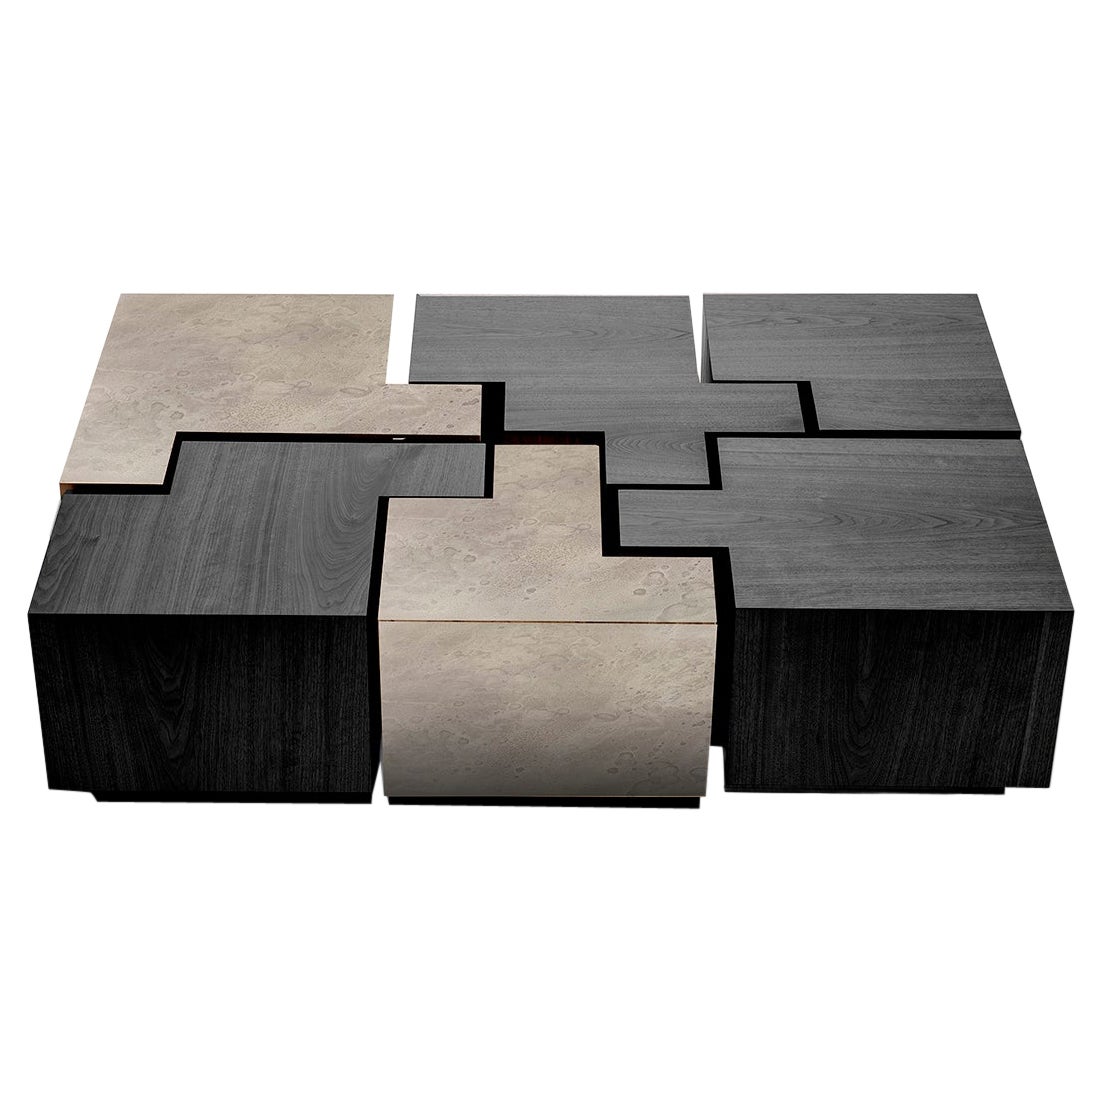 Blackened Oak and Zinc Puzzle Table For Sale